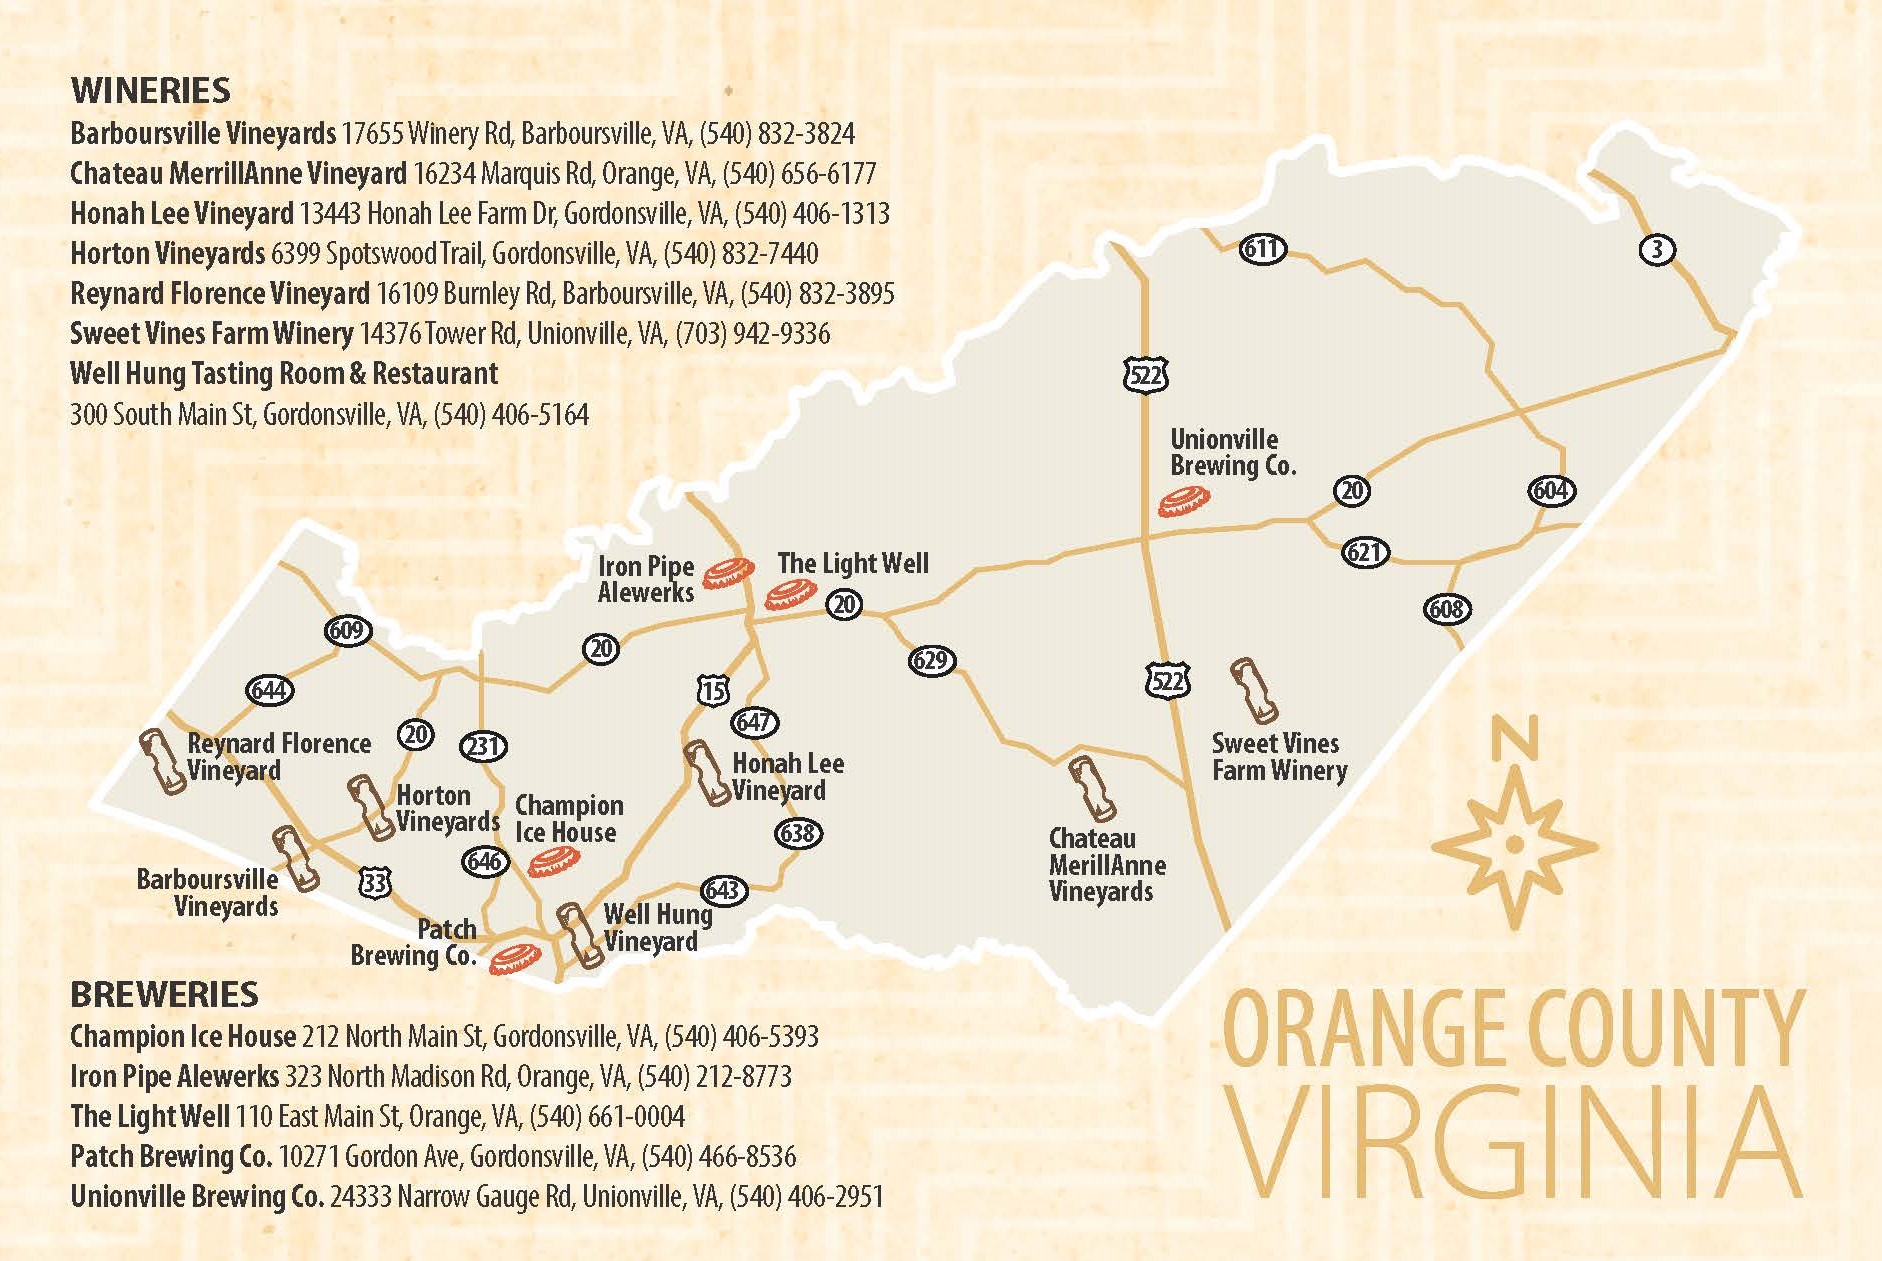 Orange County Virginia brewery and winery map